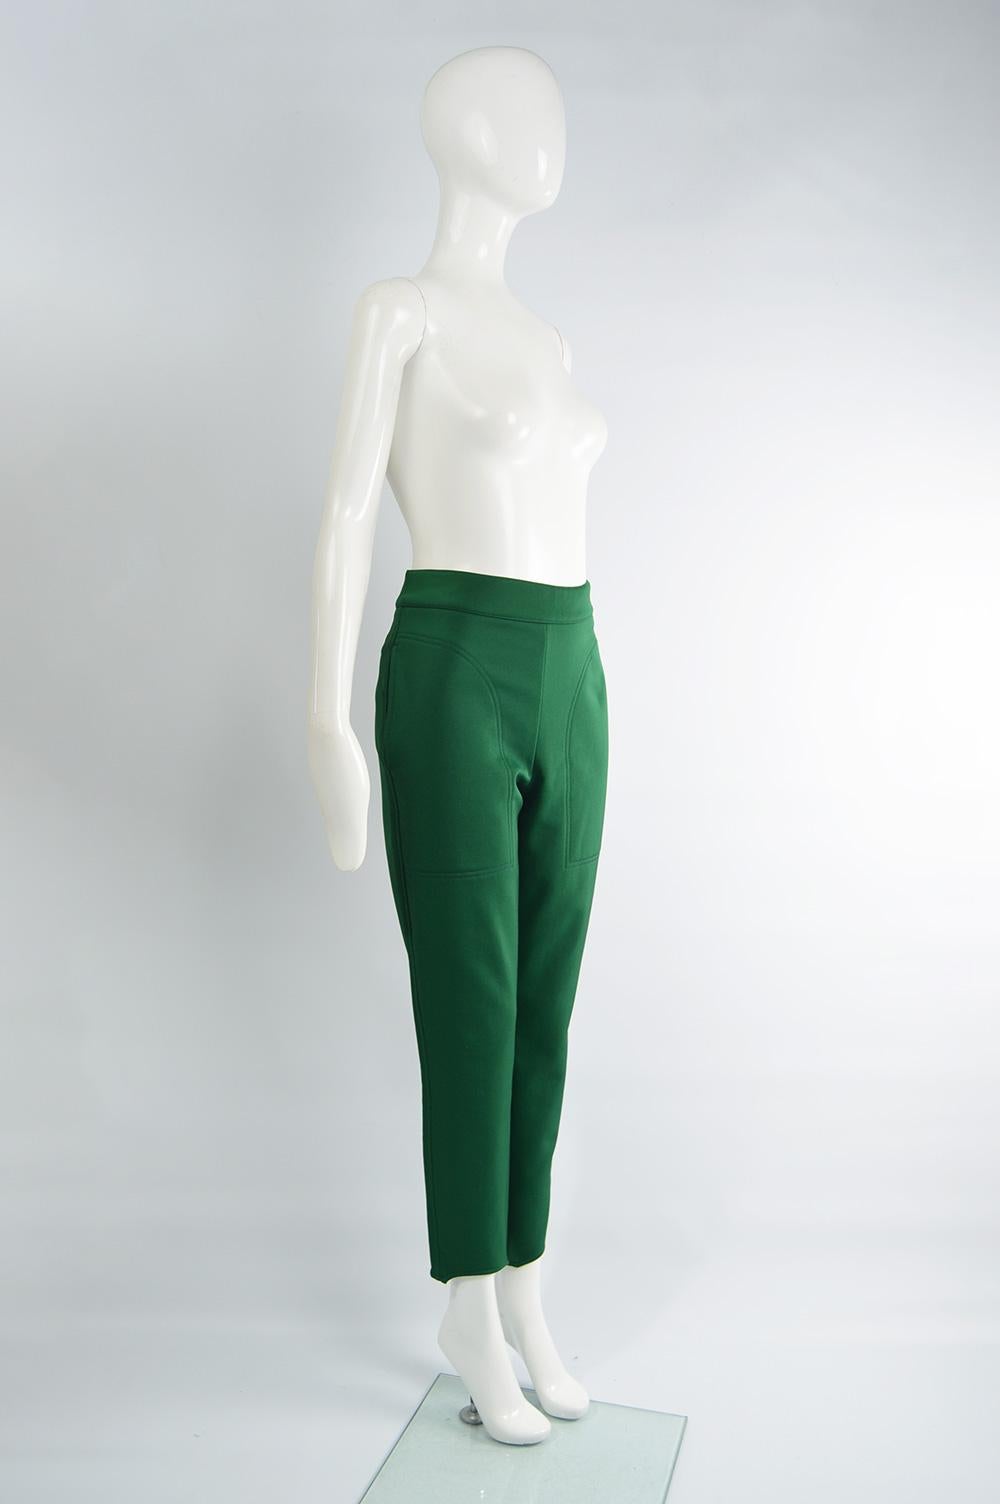 Moschino Green Stretch Jersey Slim Leg High Waist Vintage Pants, 1980s  In Good Condition For Sale In Doncaster, South Yorkshire